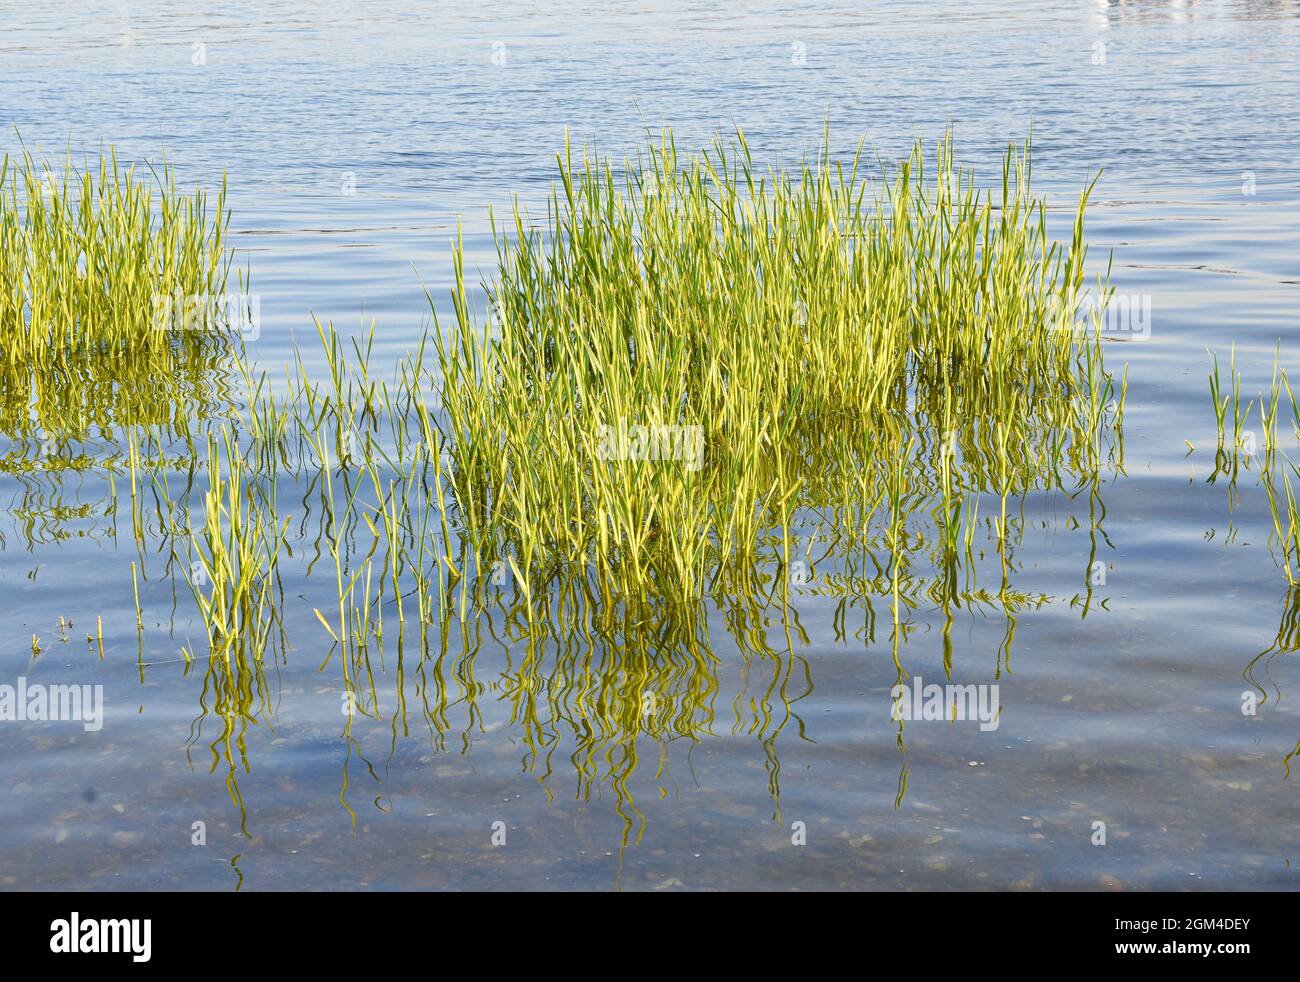 Clusters of green marsh grass (Spartina alterniflora) stand above shallow marine waters. Background. Long Island, New York. Stock Photo